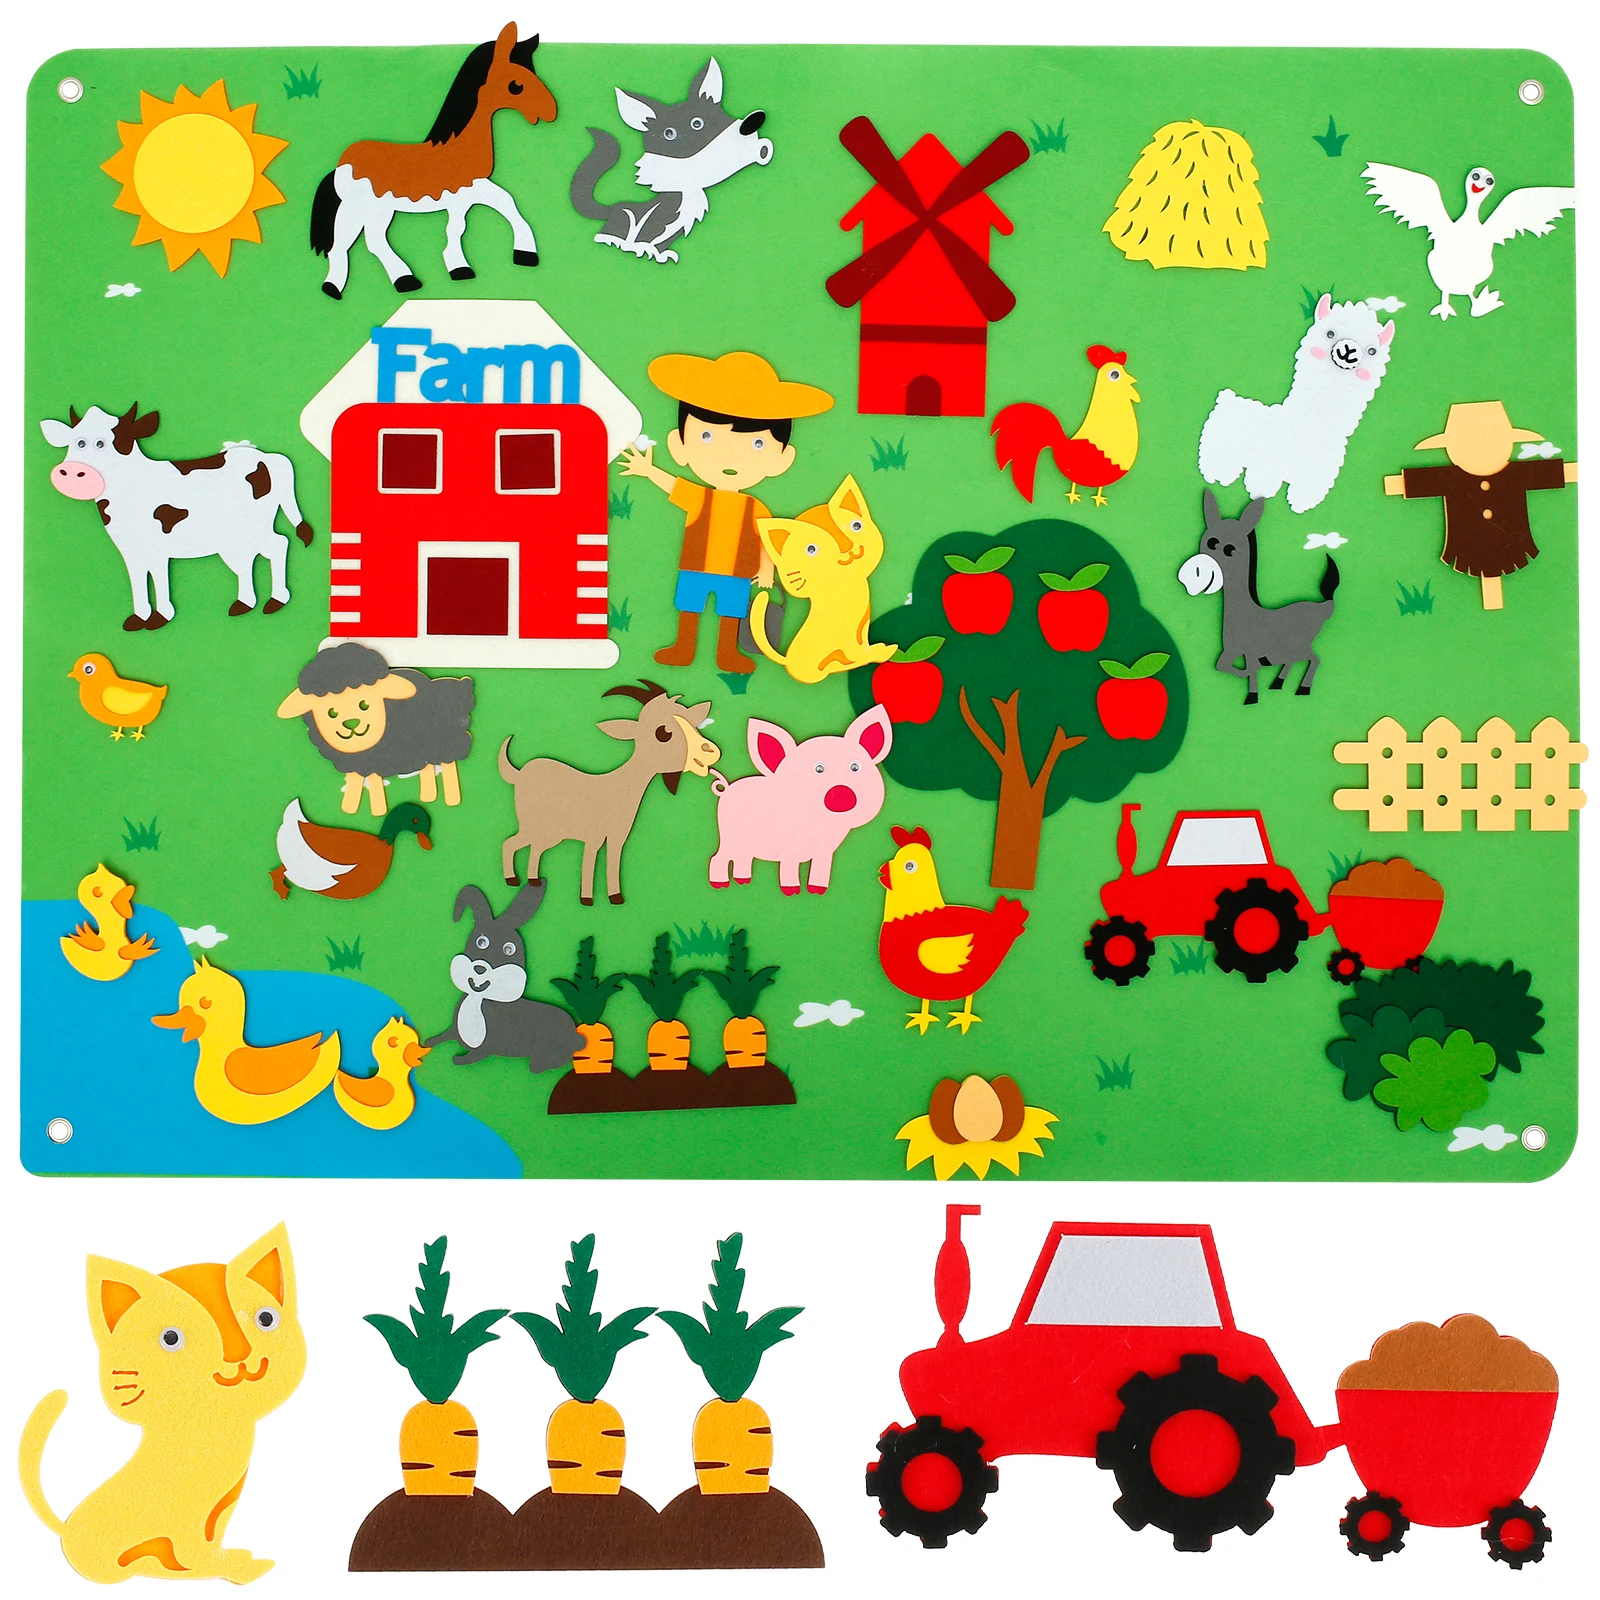 Farm Animals Felt Story Board Set Child Learning Interactive Play Storybook Wall Hanging Decor Puzzle Toys Kids Christmas Gifts